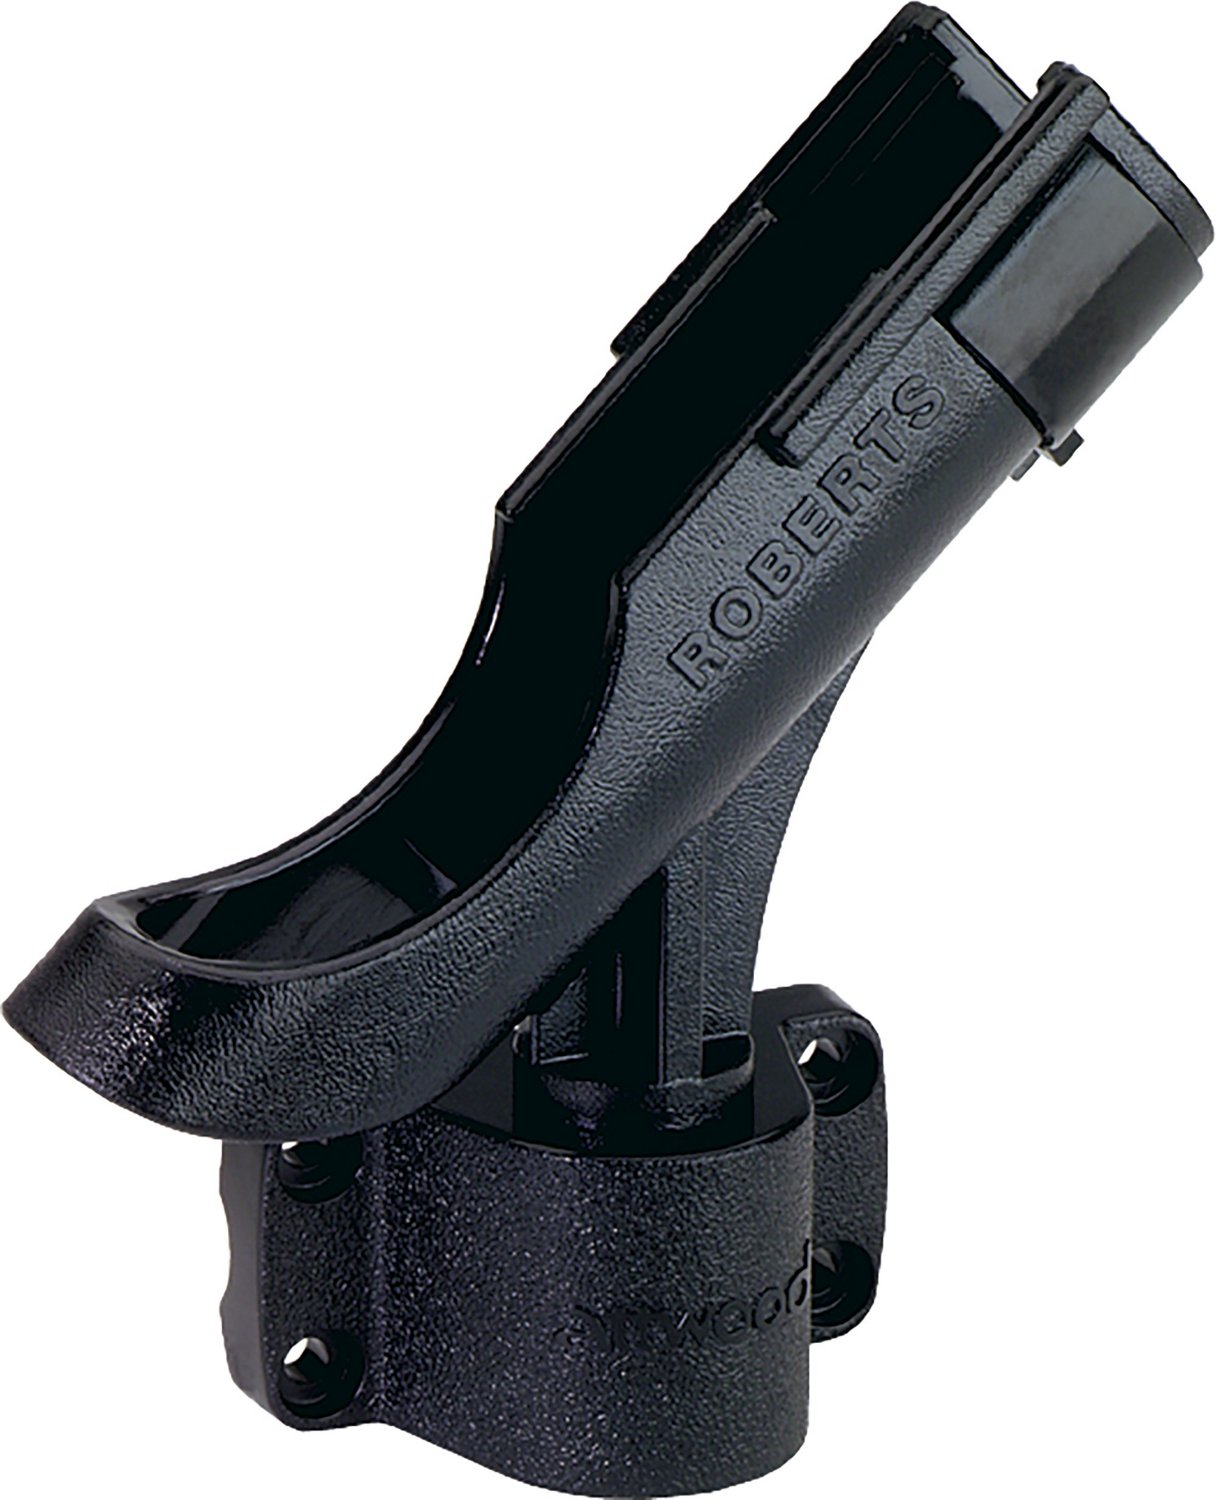 Attwood 2-In-1 Non-Adjustable Rod Holder